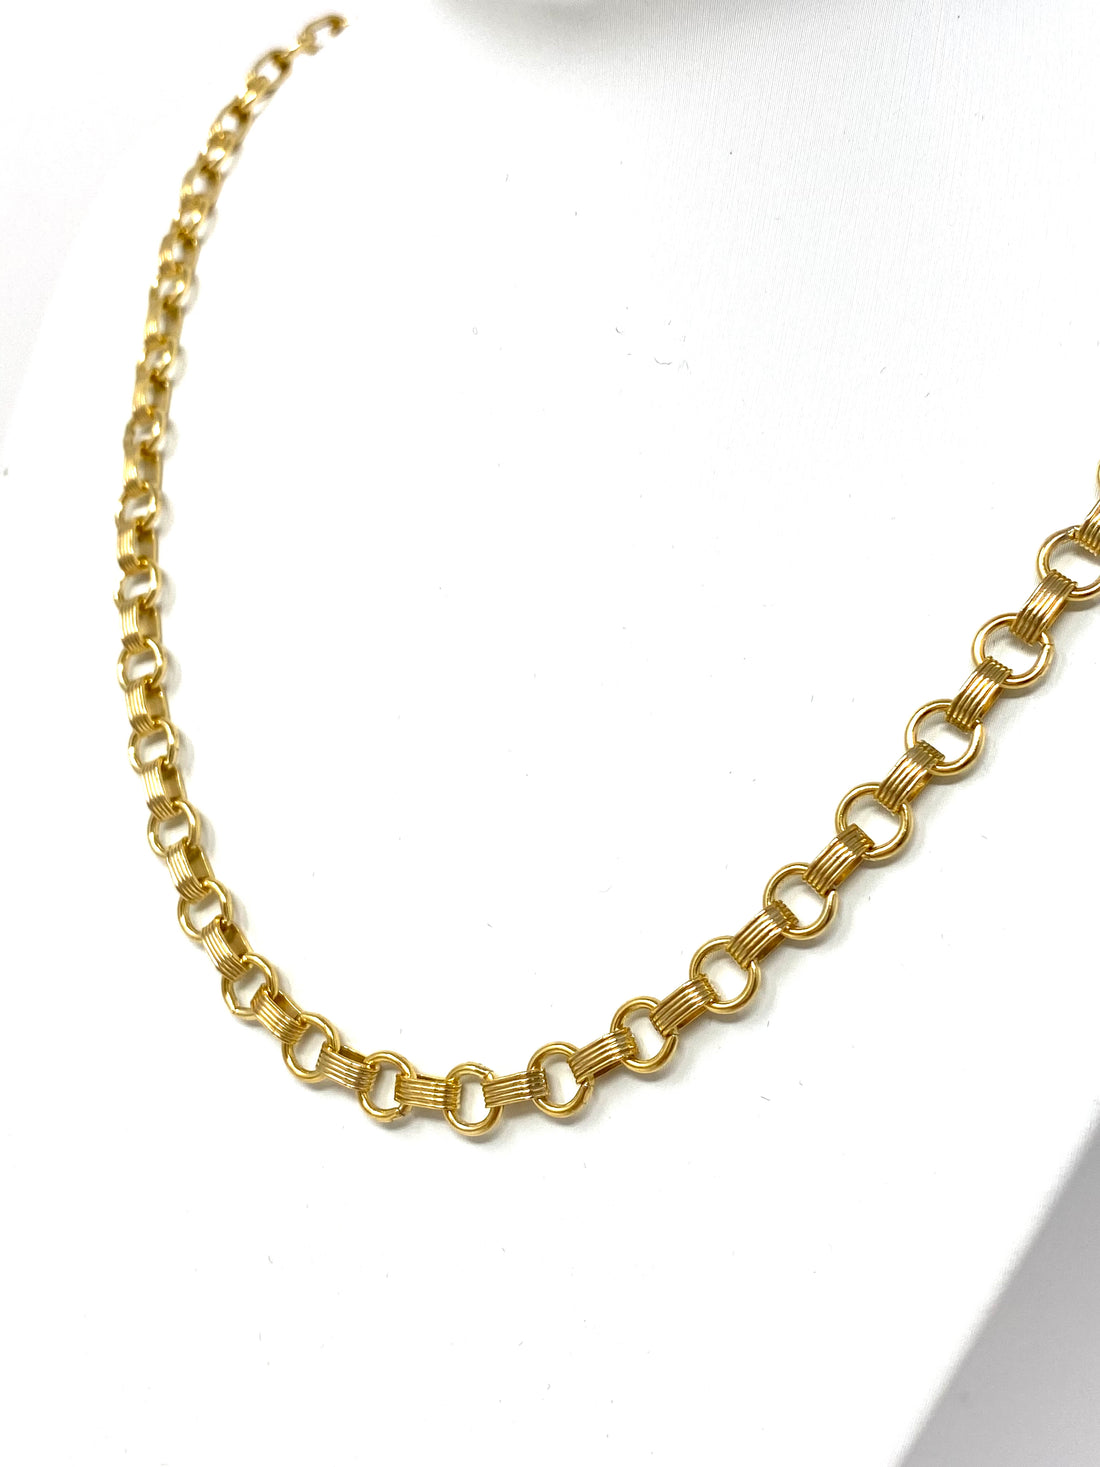 Quinn Link Necklace in 14K Gold Fill